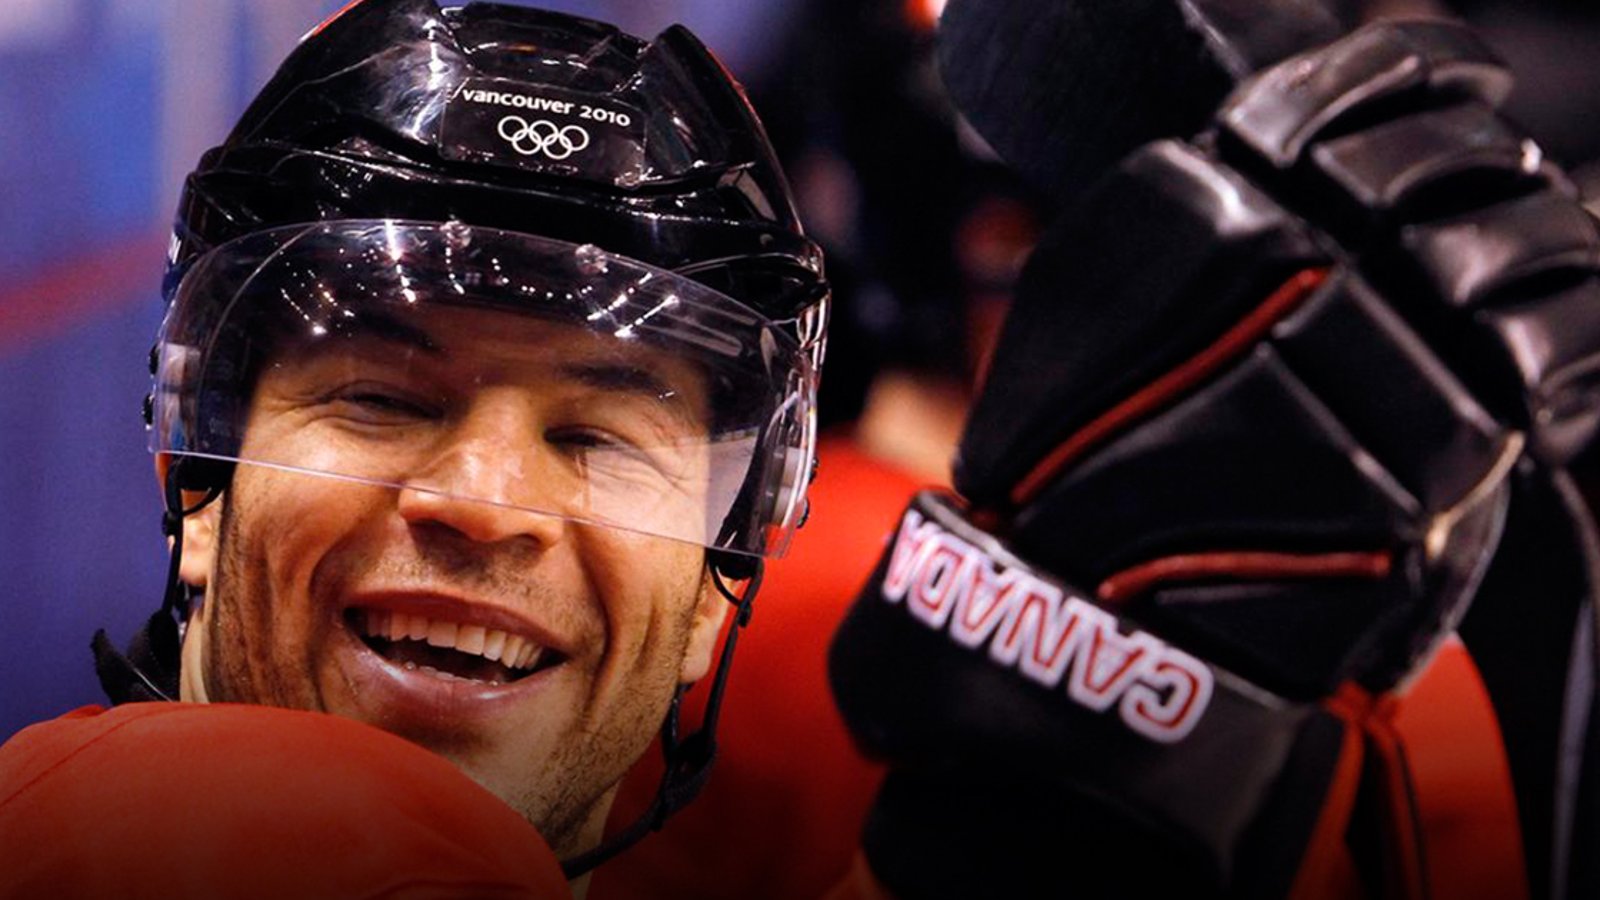 Your Call: Should Iginla be Canada’s captain?